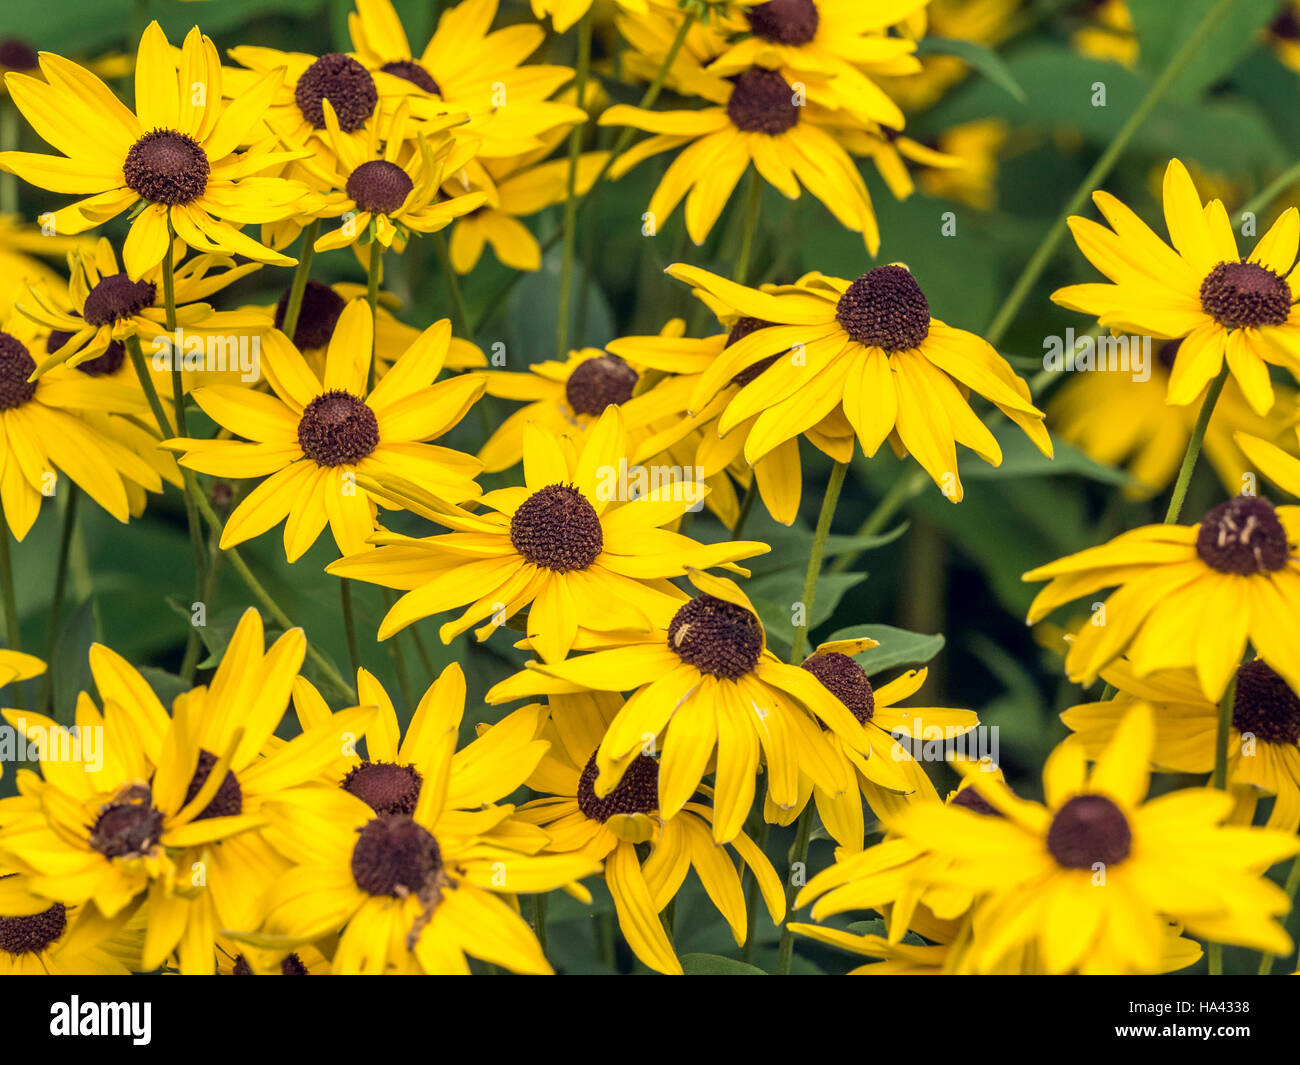 Rudbeckia hirta, called black-eyed-susan,  in the sunflower family Stock Photo